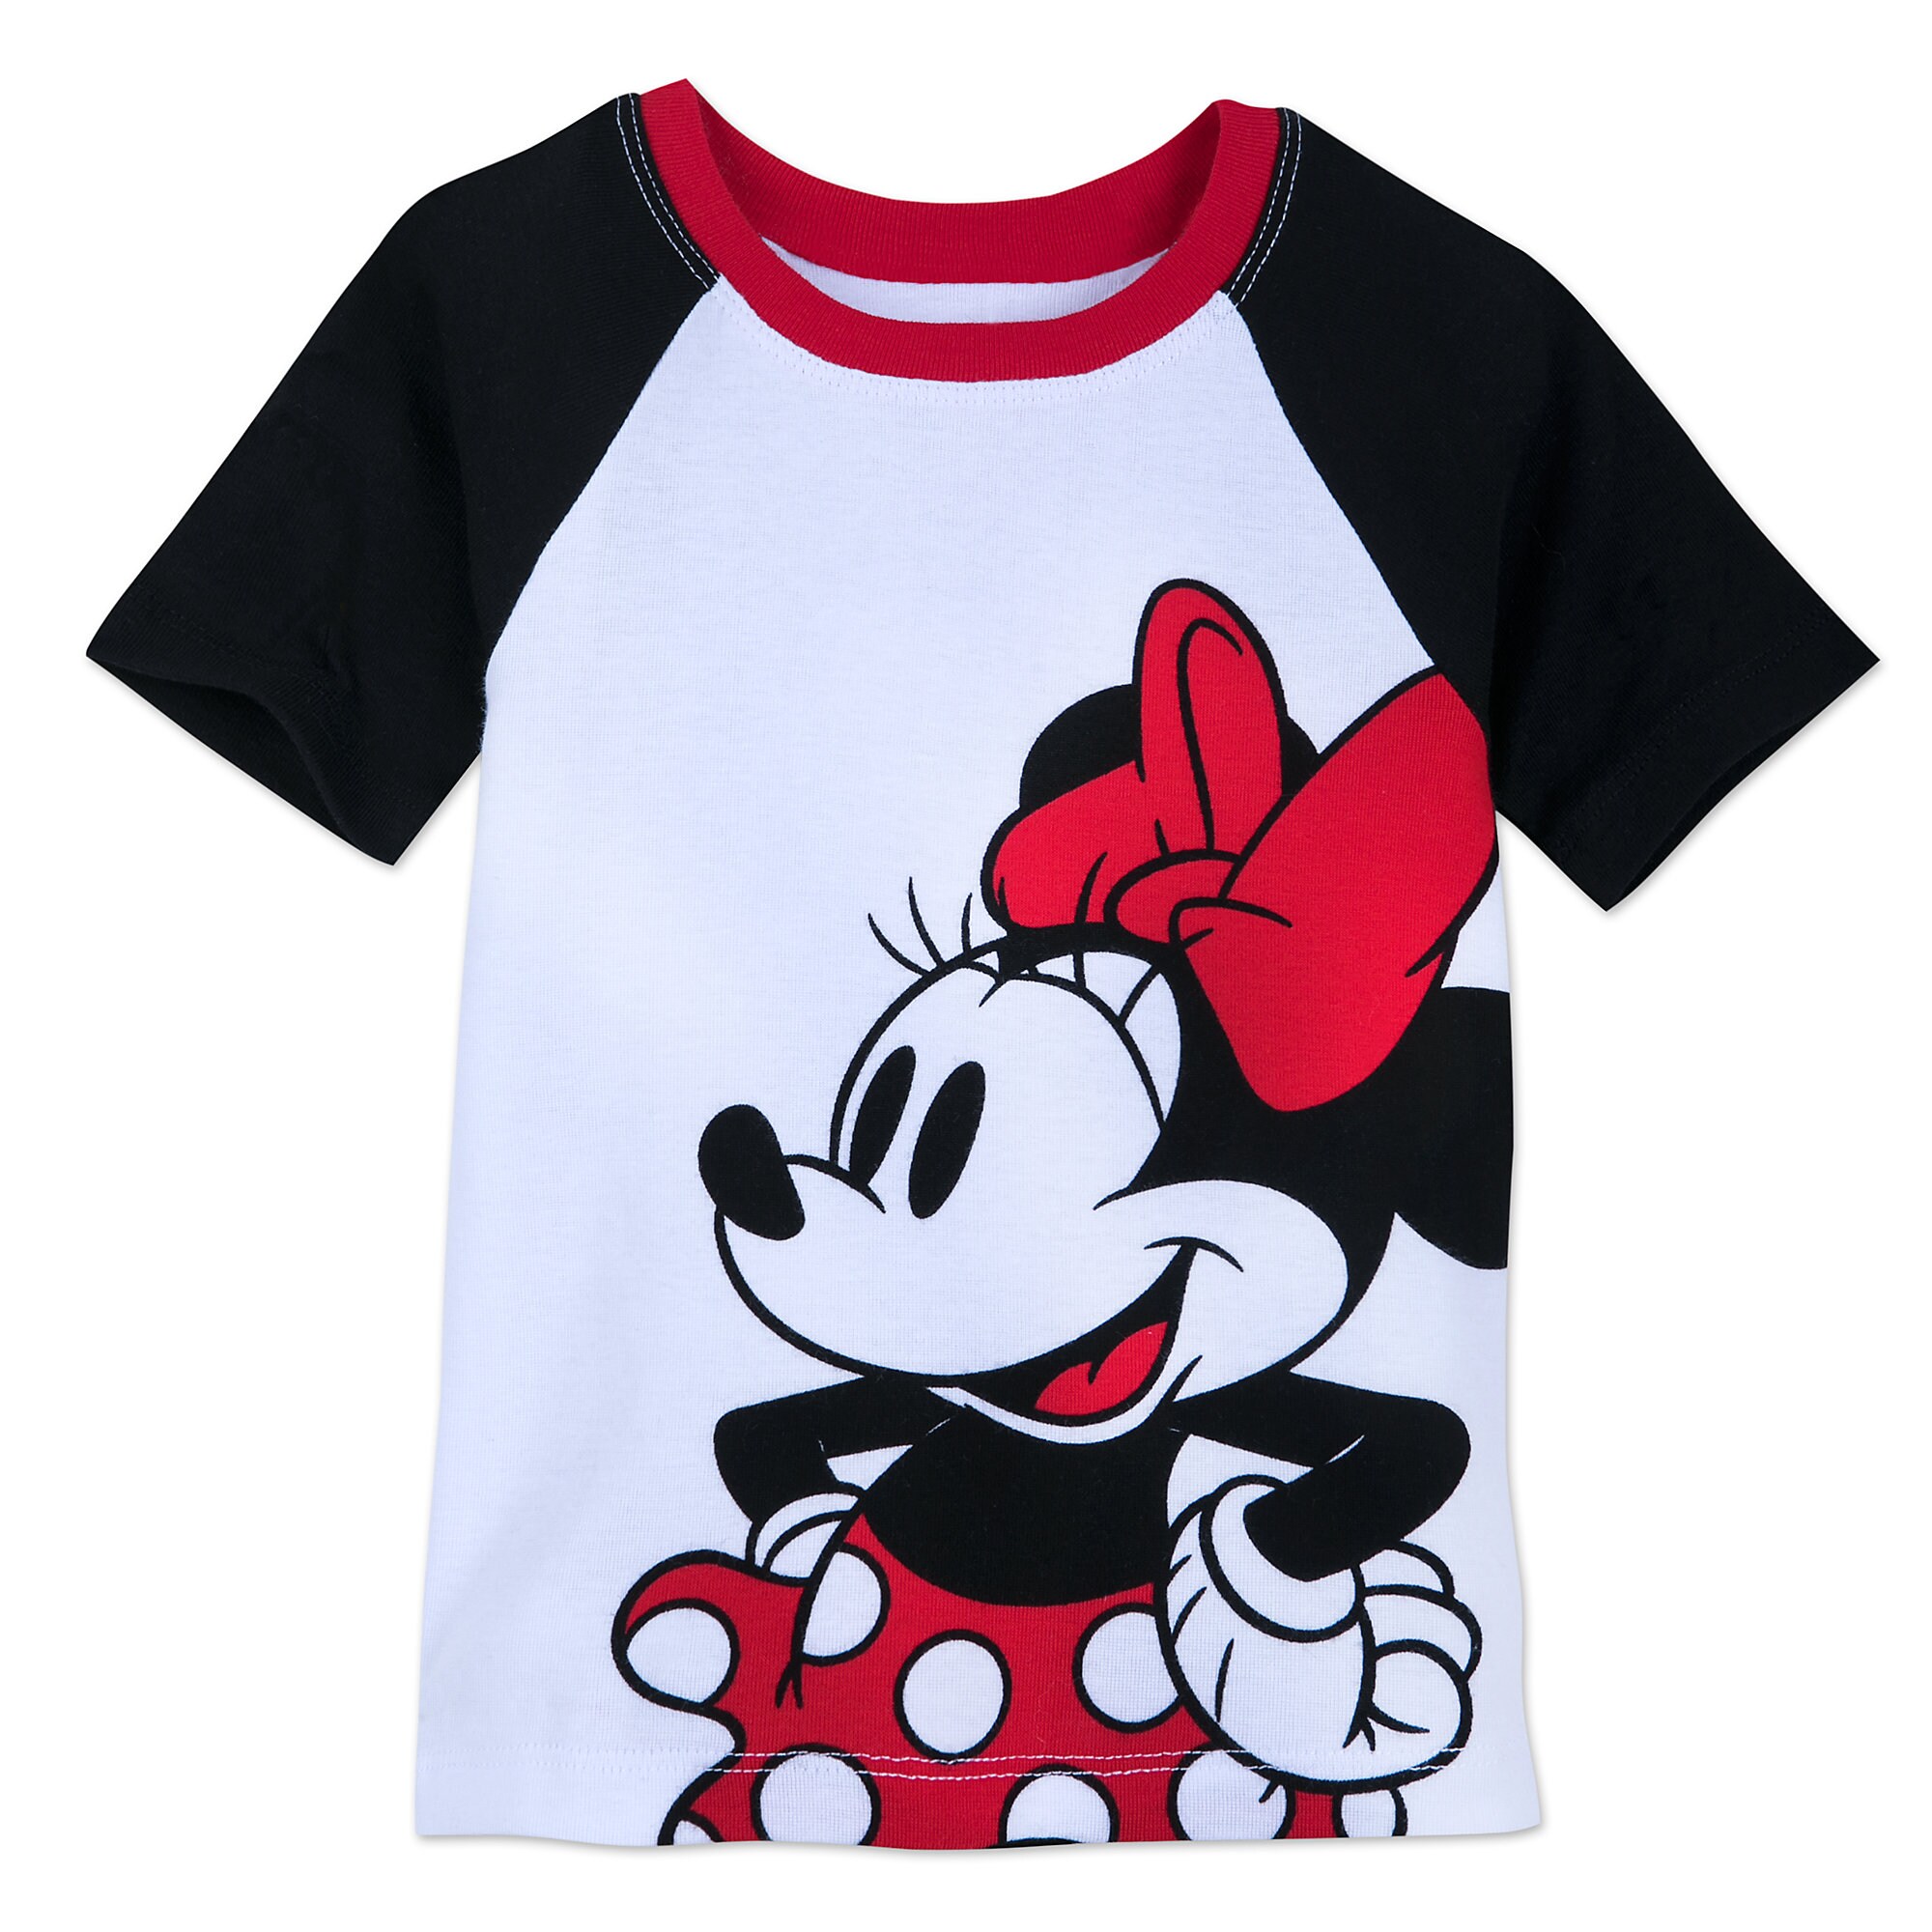 Minnie Mouse PJ PALS for Kids now available online – Dis Merchandise News